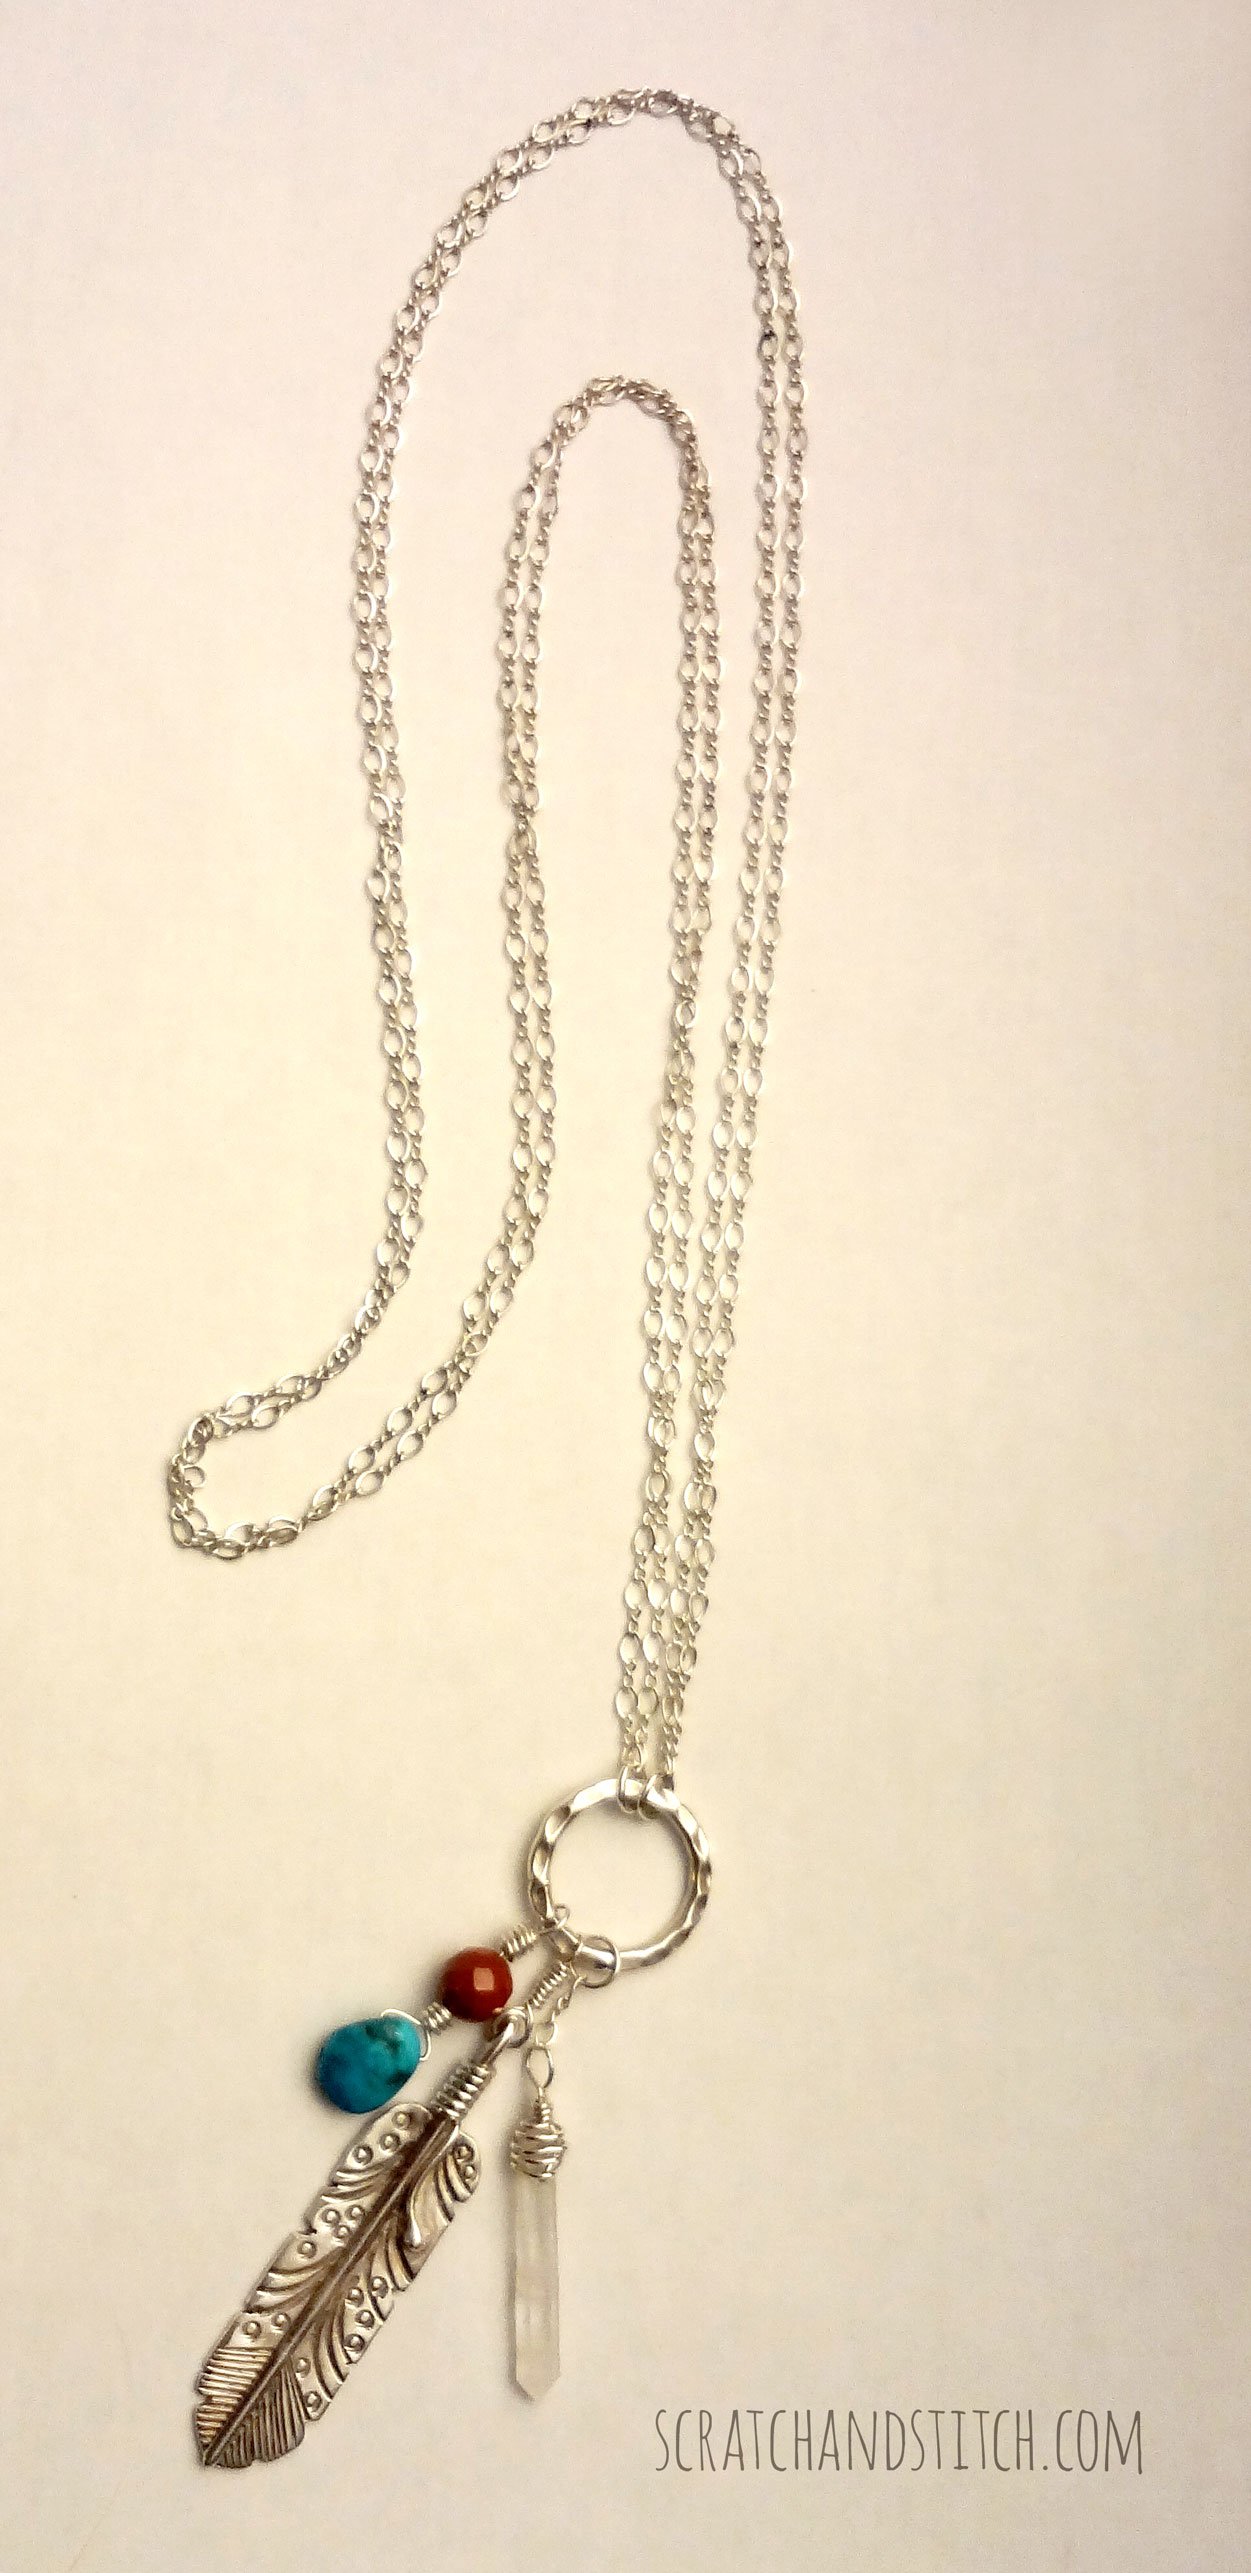 Long Silver Necklace with Feather by scratchandstitch